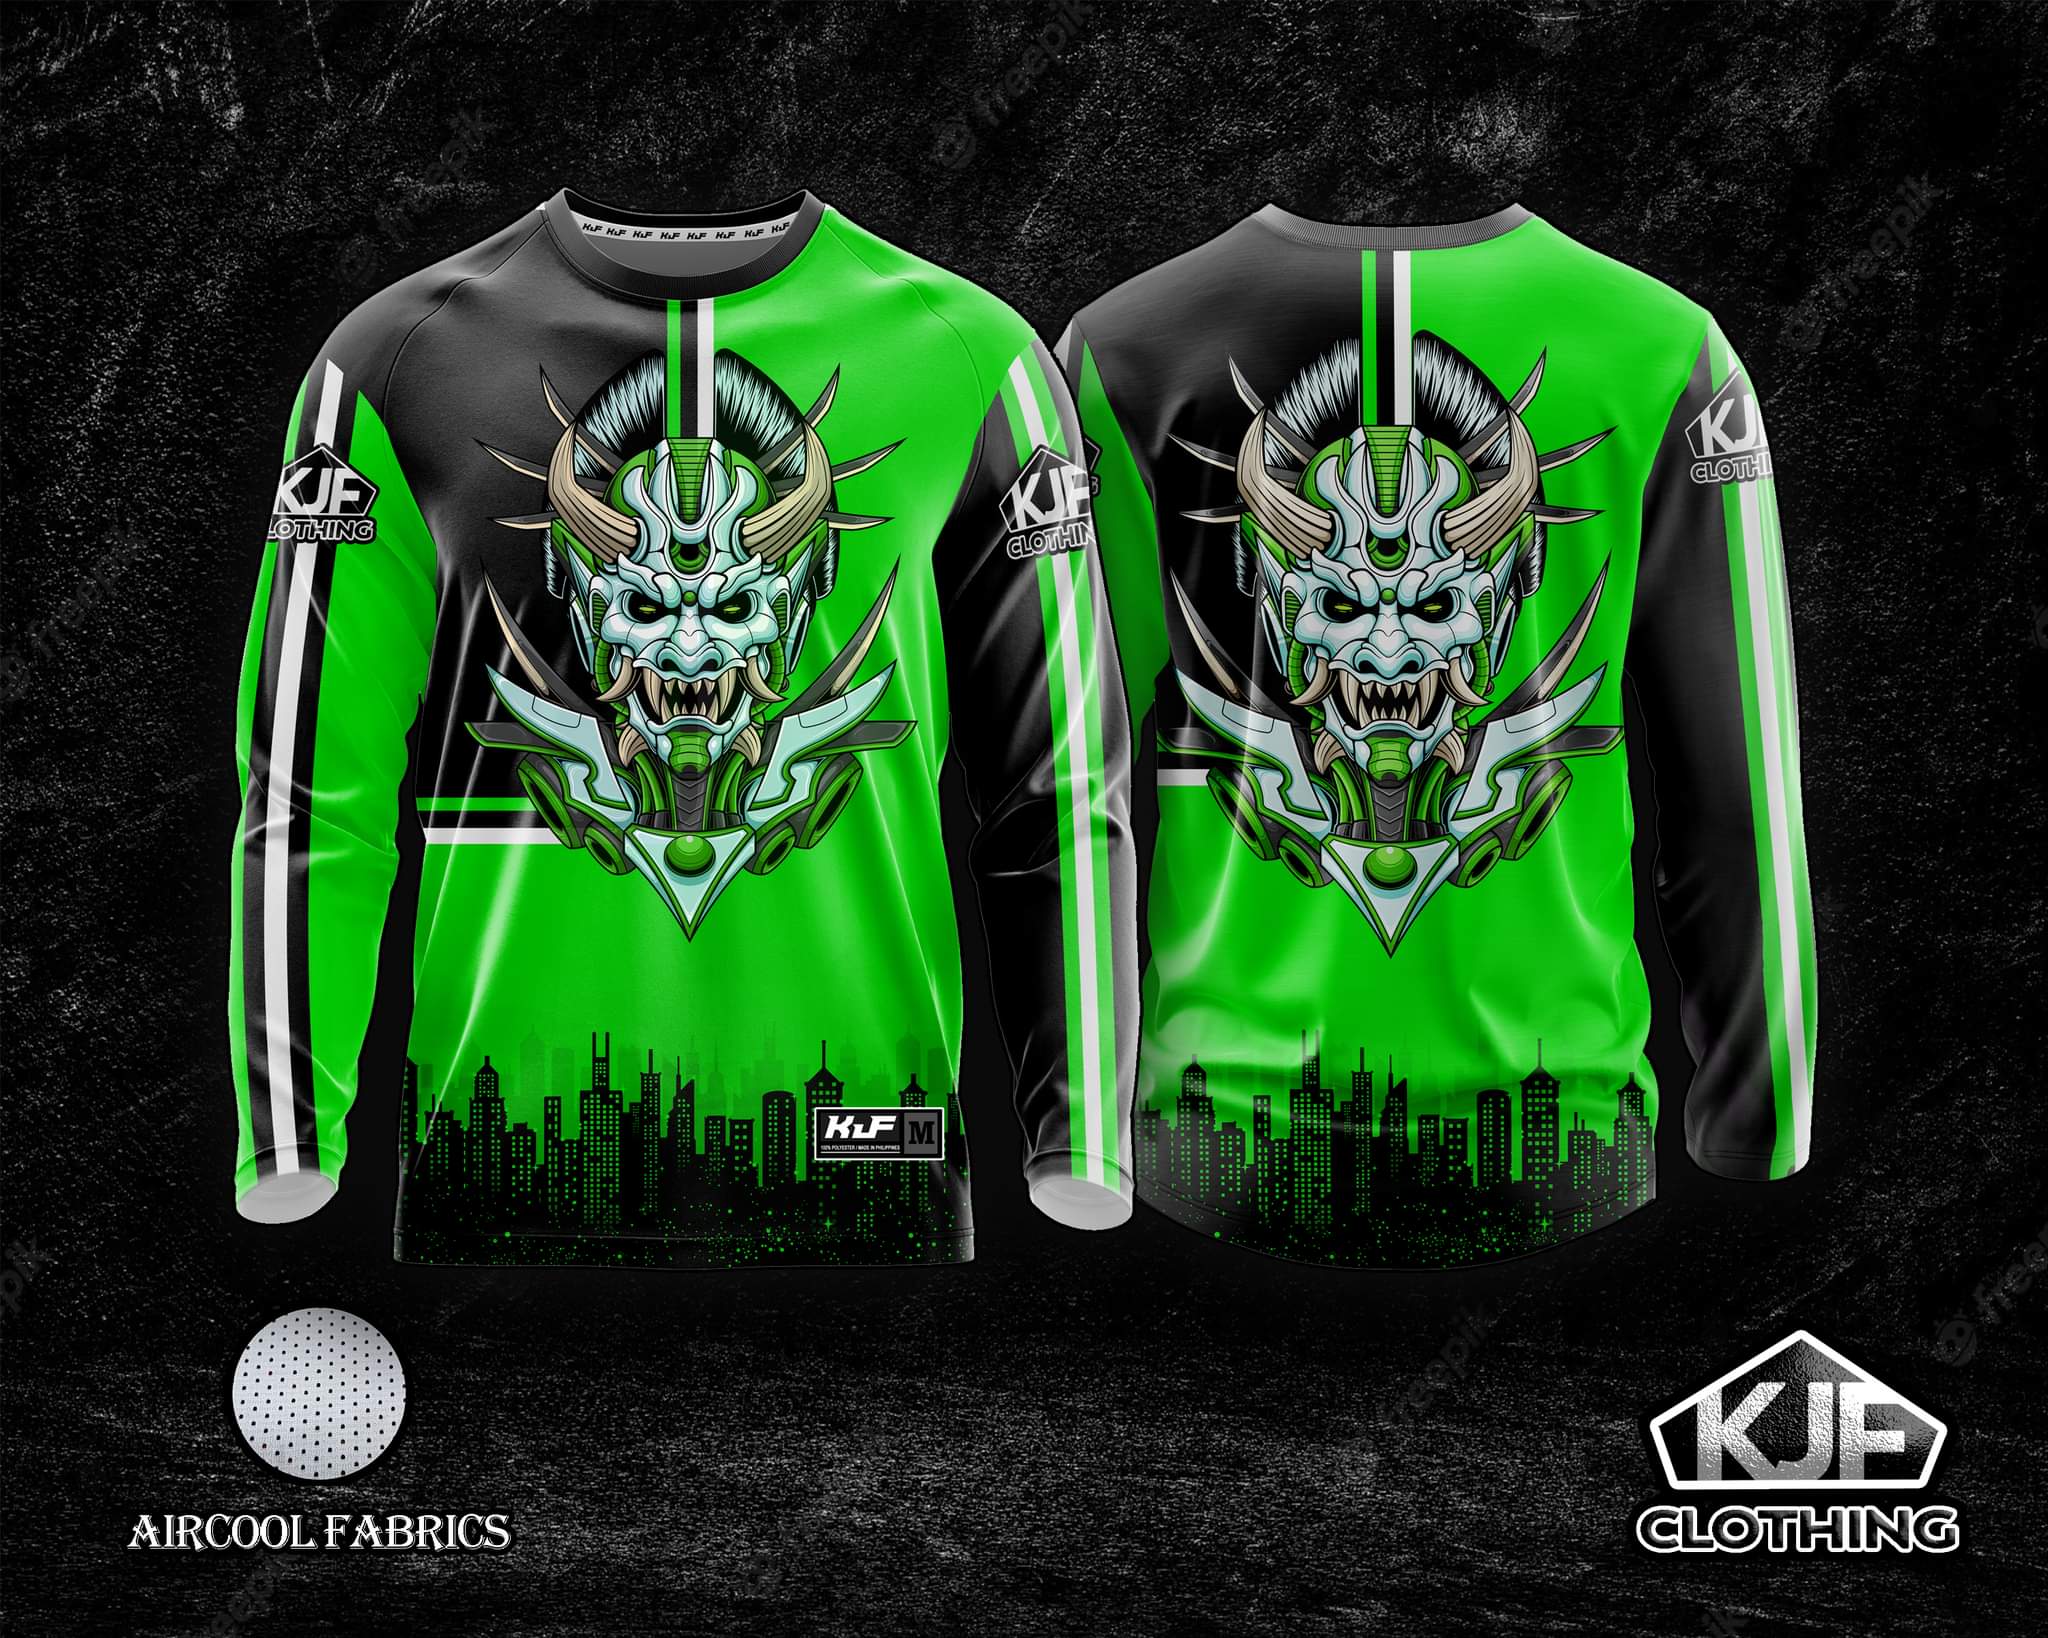 KJF CLOTHING 06 PROTECTIVE LONGSLEEVE FOR RIDER full sublimation high ...